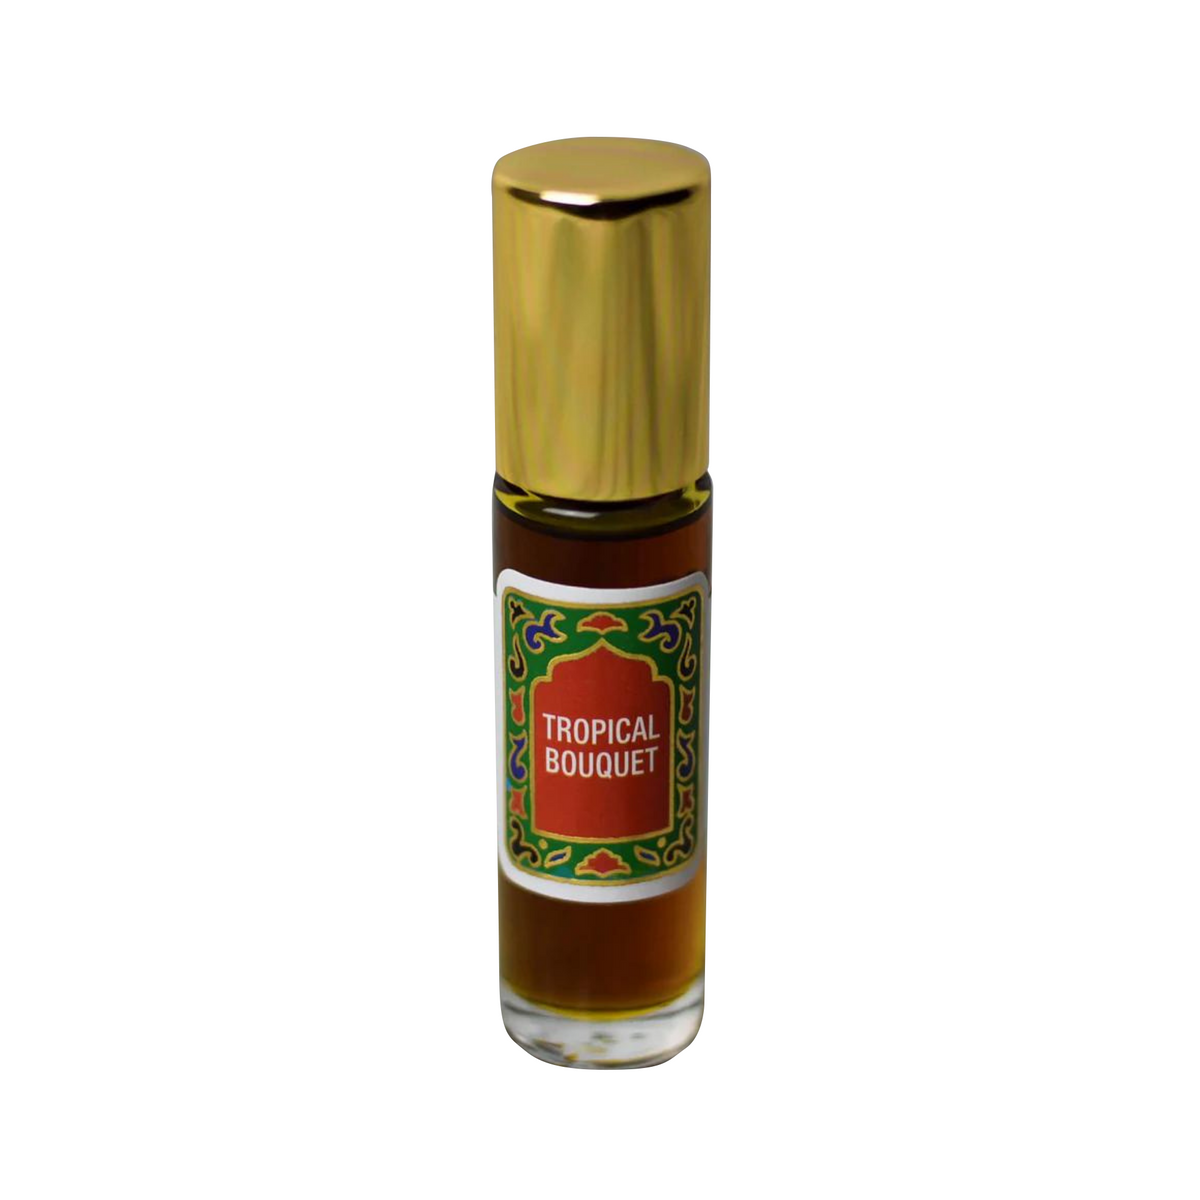 Primary image of Tropical Bouquet Fragrance Roll-On